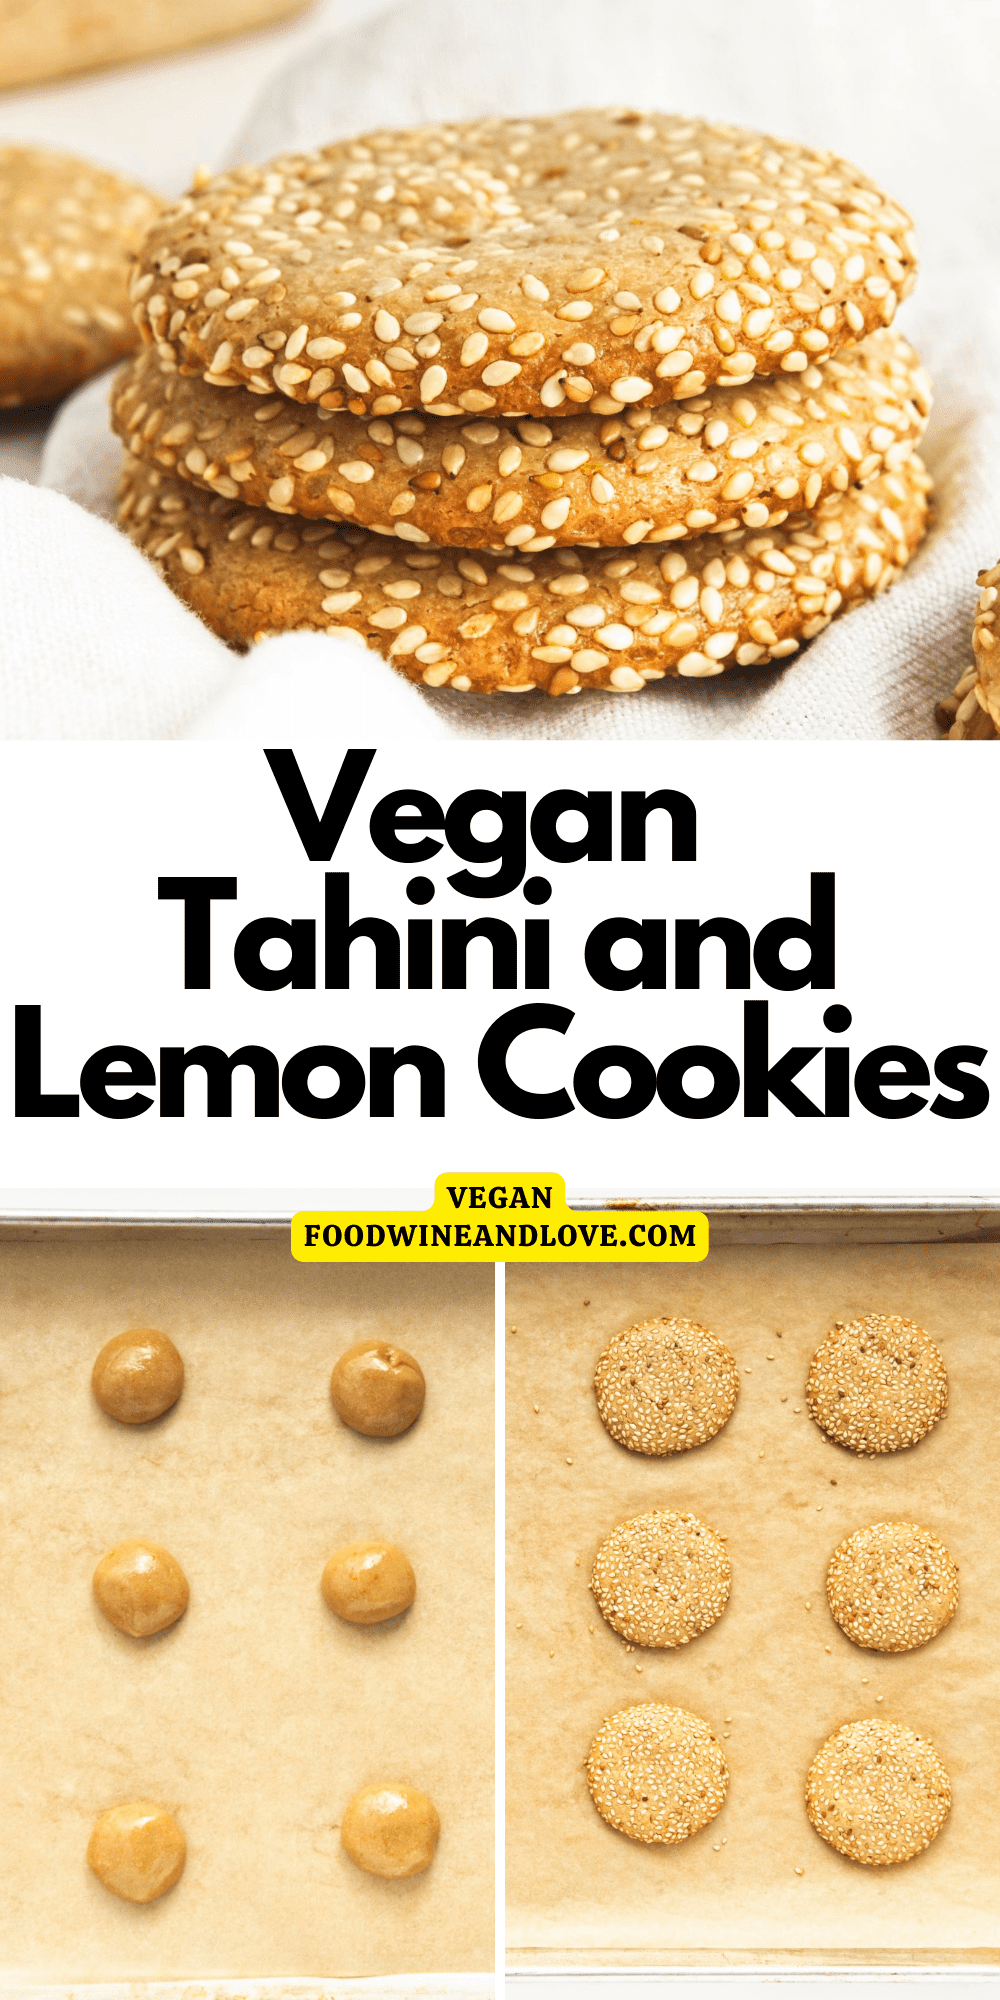 Vegan Tahini and Lemon Cookies, a simple and delicious soft and chewy dessert or snack recipe that is full of flavor.